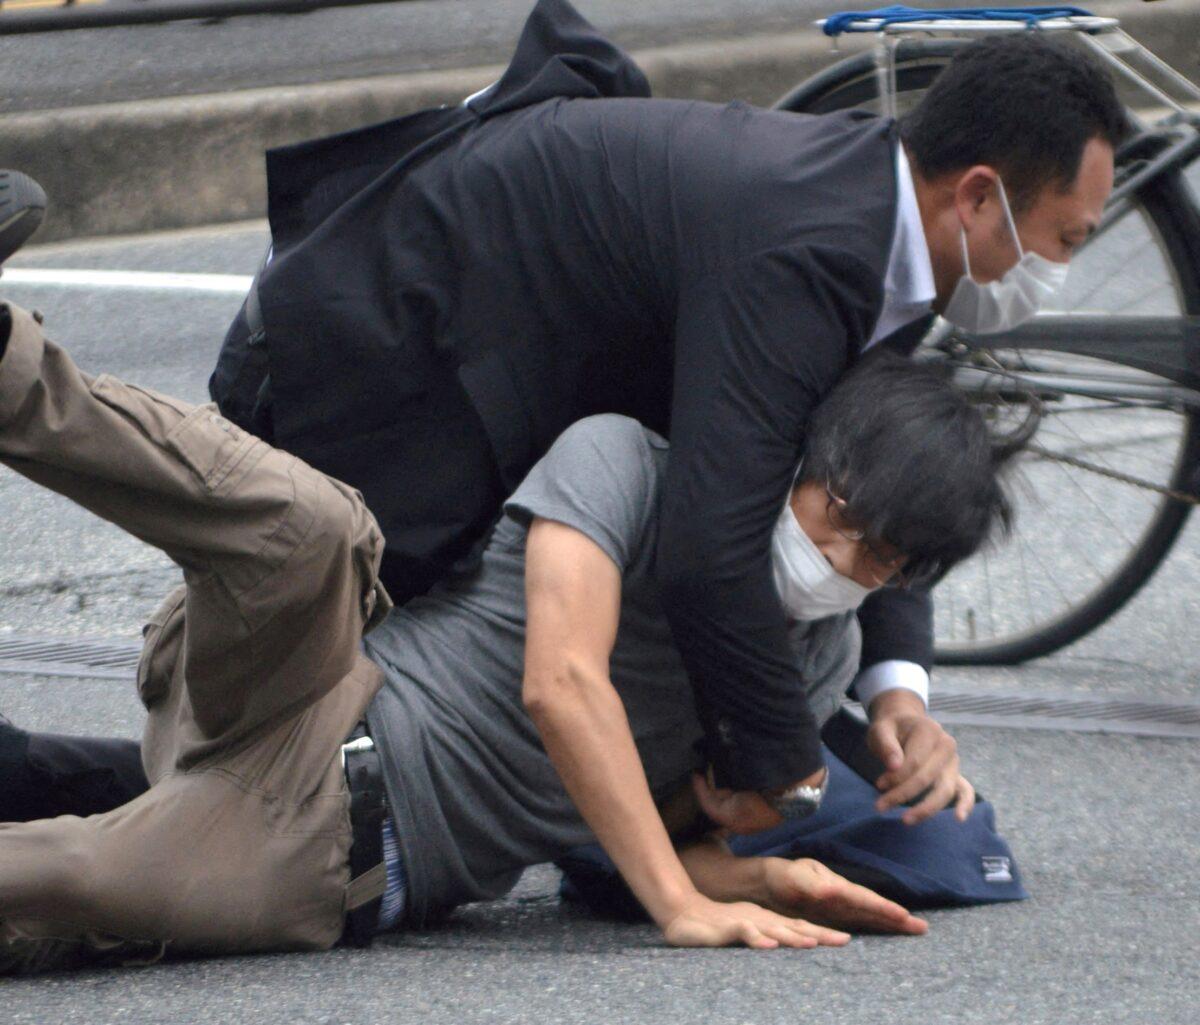 A man, believed to be a suspect in shooting former Japanese Prime Minister Shinzo Abe, is held by police officers at Yamato Saidaiji Station in Nara, Nara prefecture, on July 8, 2022. (The Yomiuri Shimbun via Reuters)